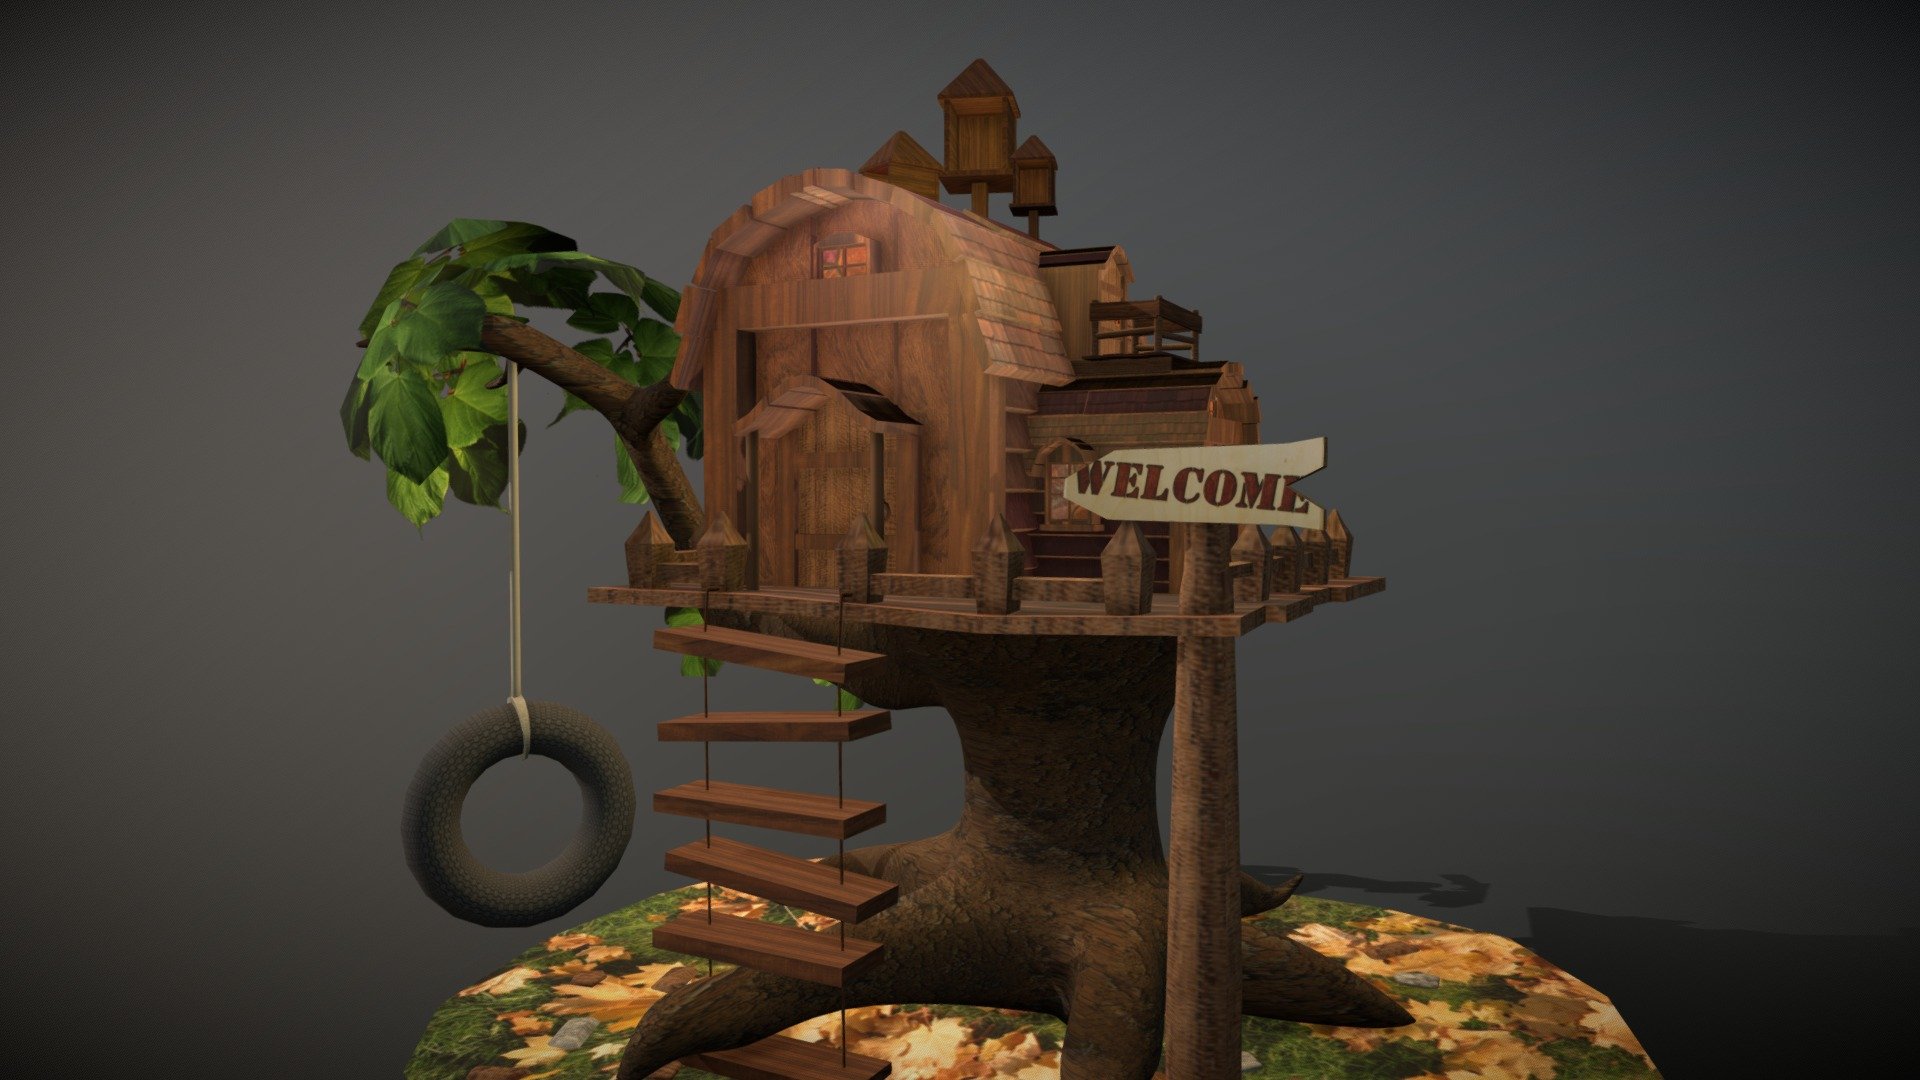 I was dreaming about a tree house since childhood. I've got it now))) Here it is 3d model